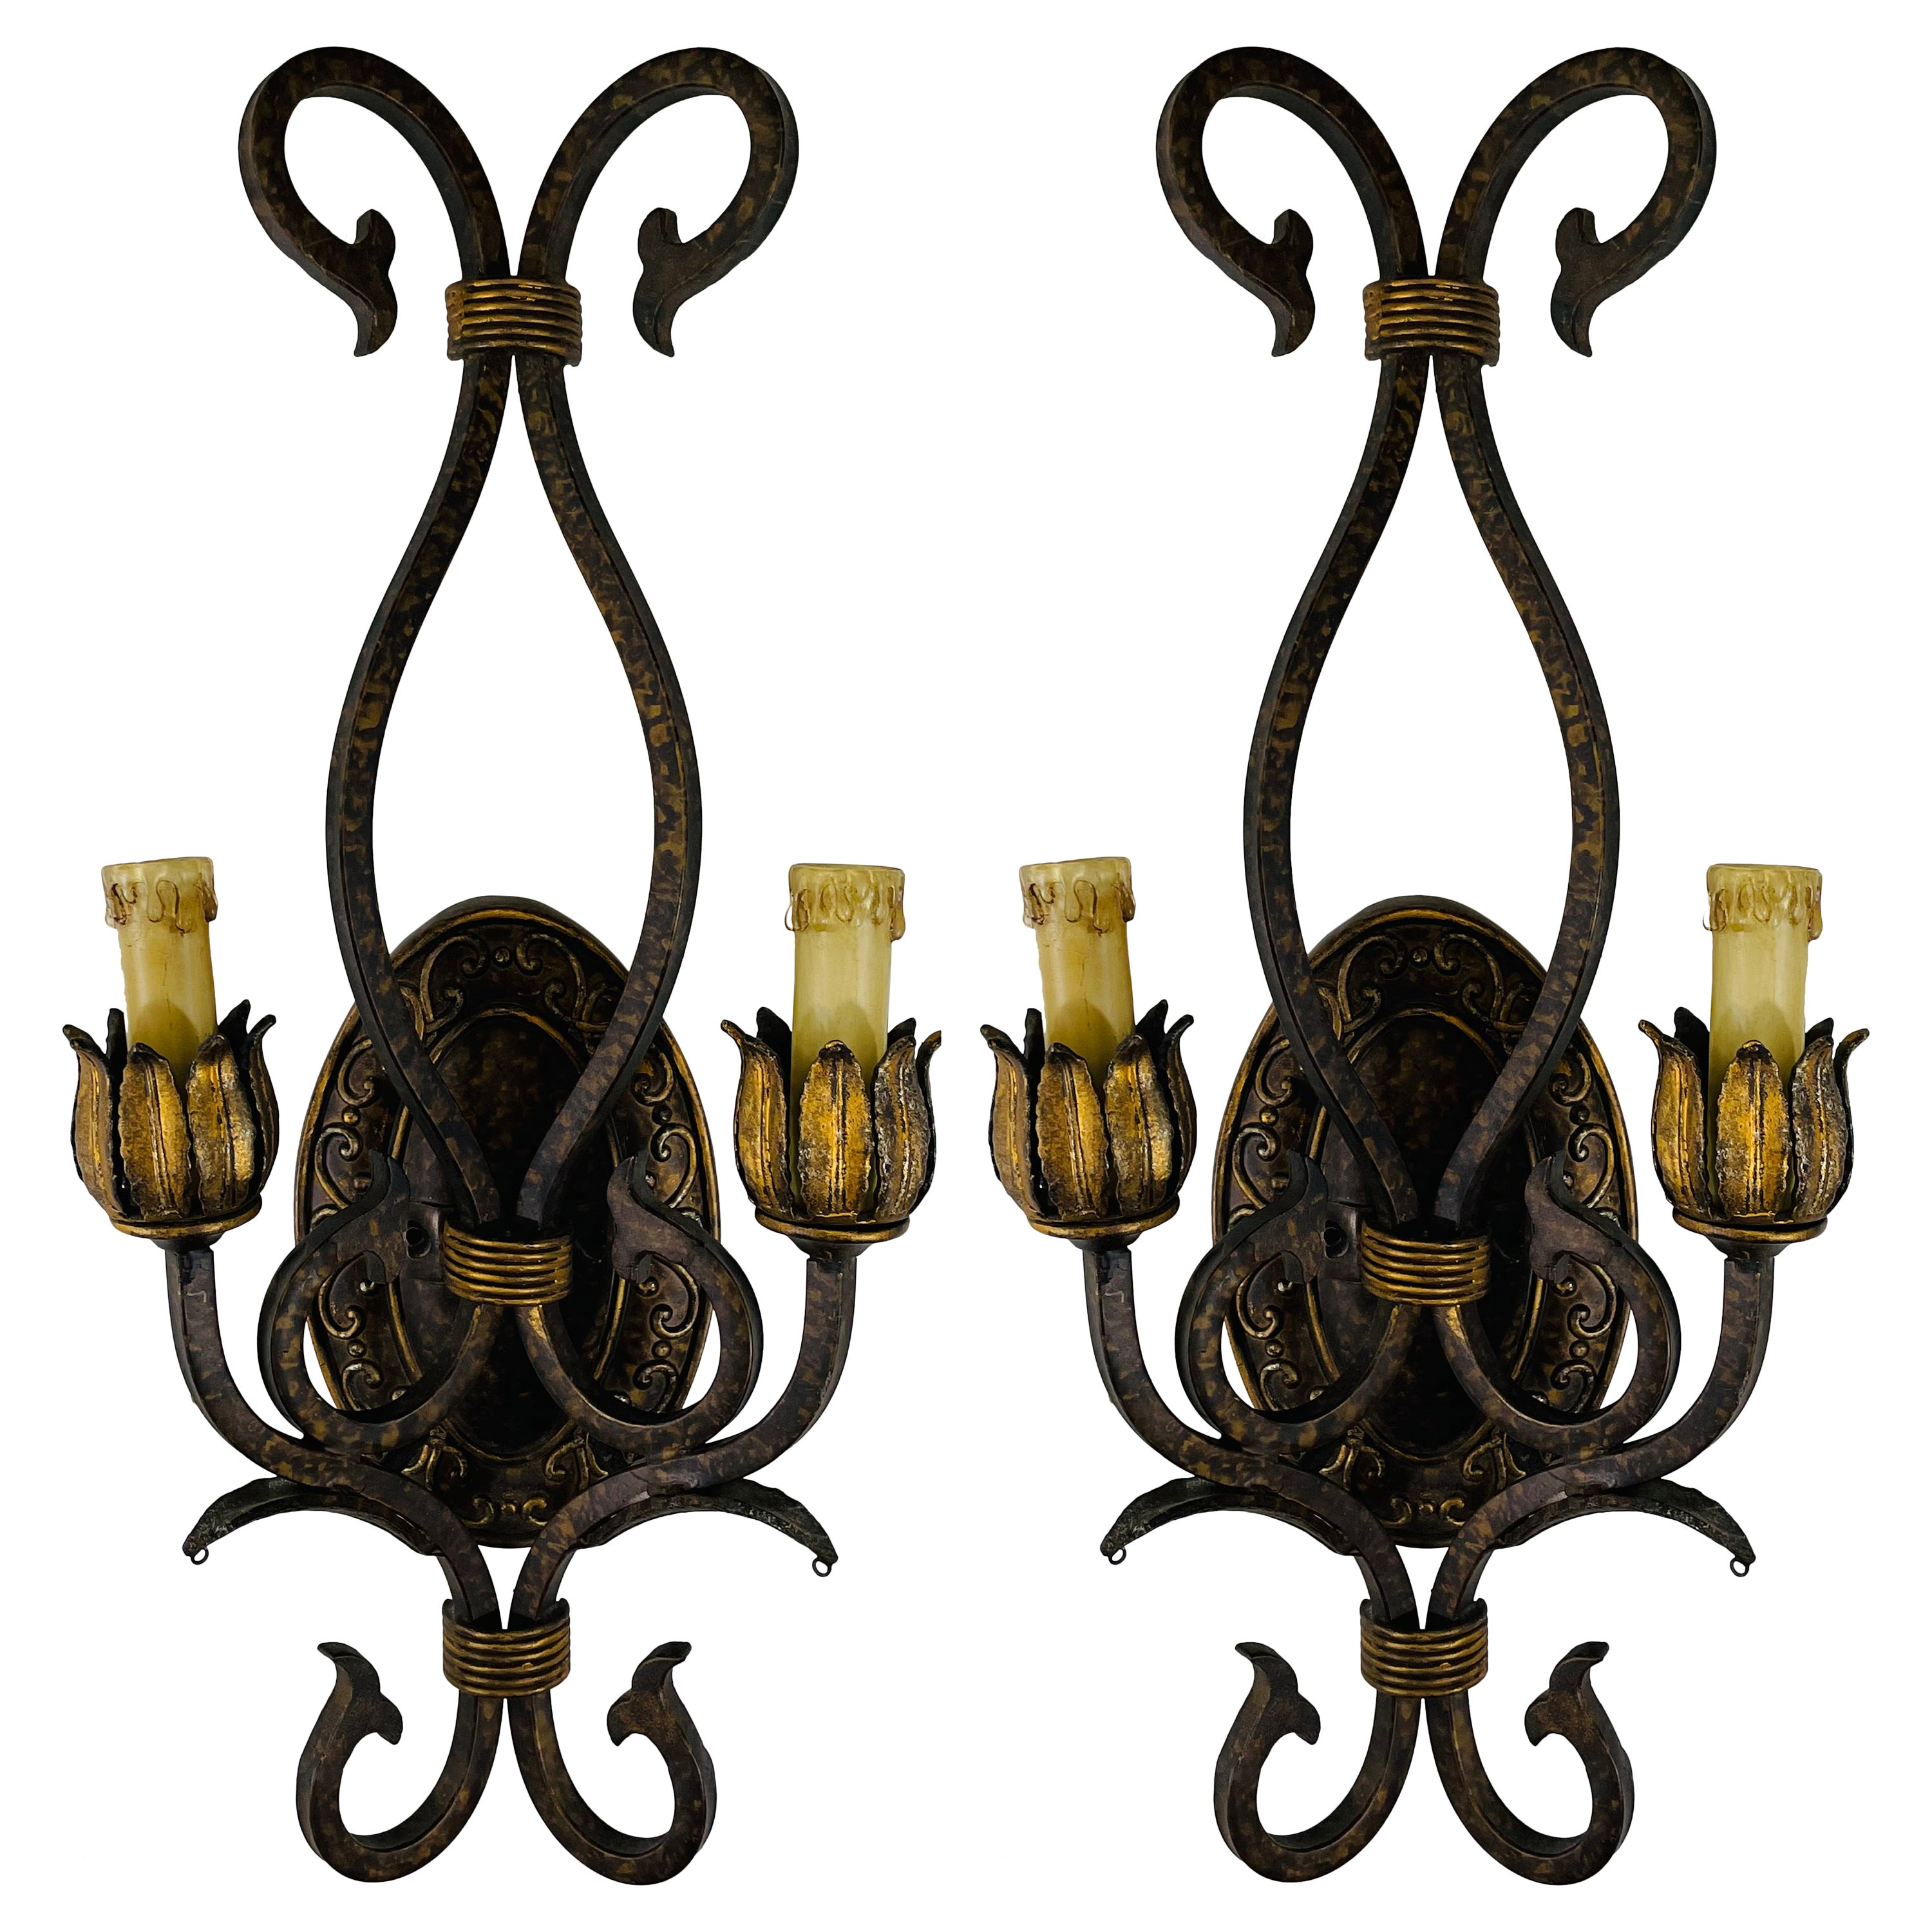 French Neoclassical Style Gilded Metal Wall Sconce, a Pair